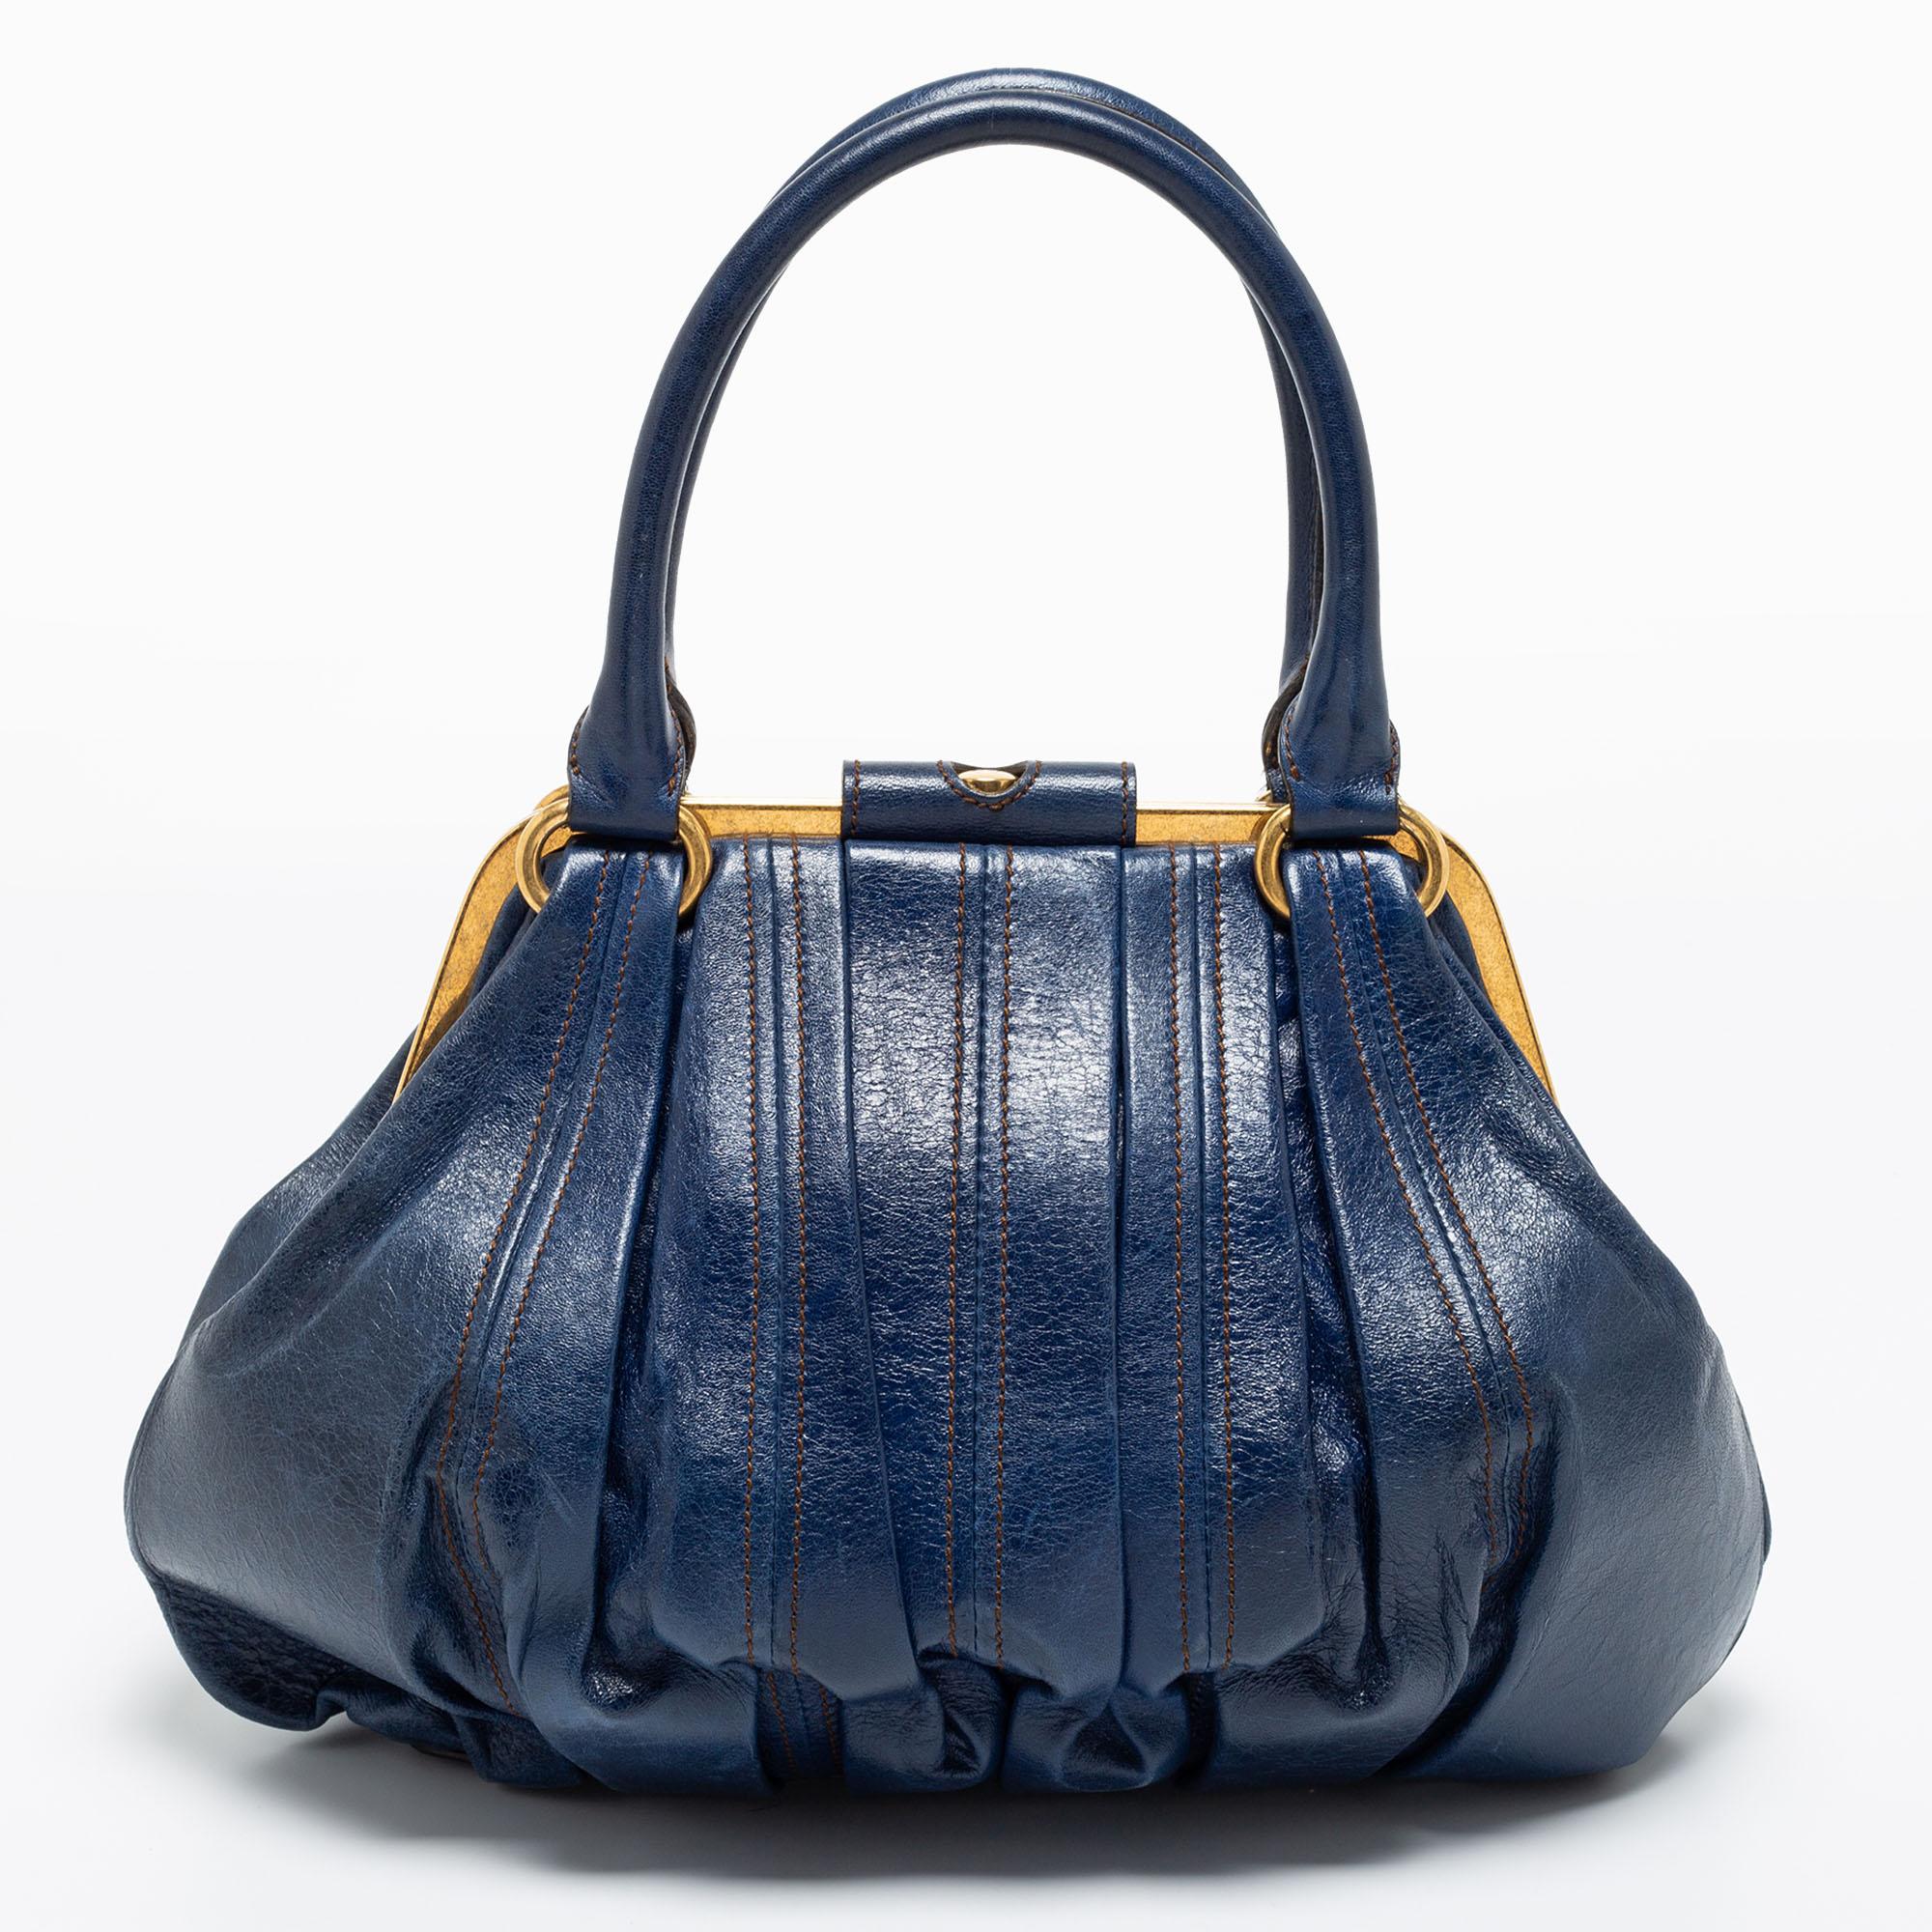 Easy to carry and stylish in appearance, this Elvie satchel from Alexander McQueen will certainly be your favorite pick this season. It is crafted using blue leather, with gold-tone hardware elevating its beauty. It provides two handles and a